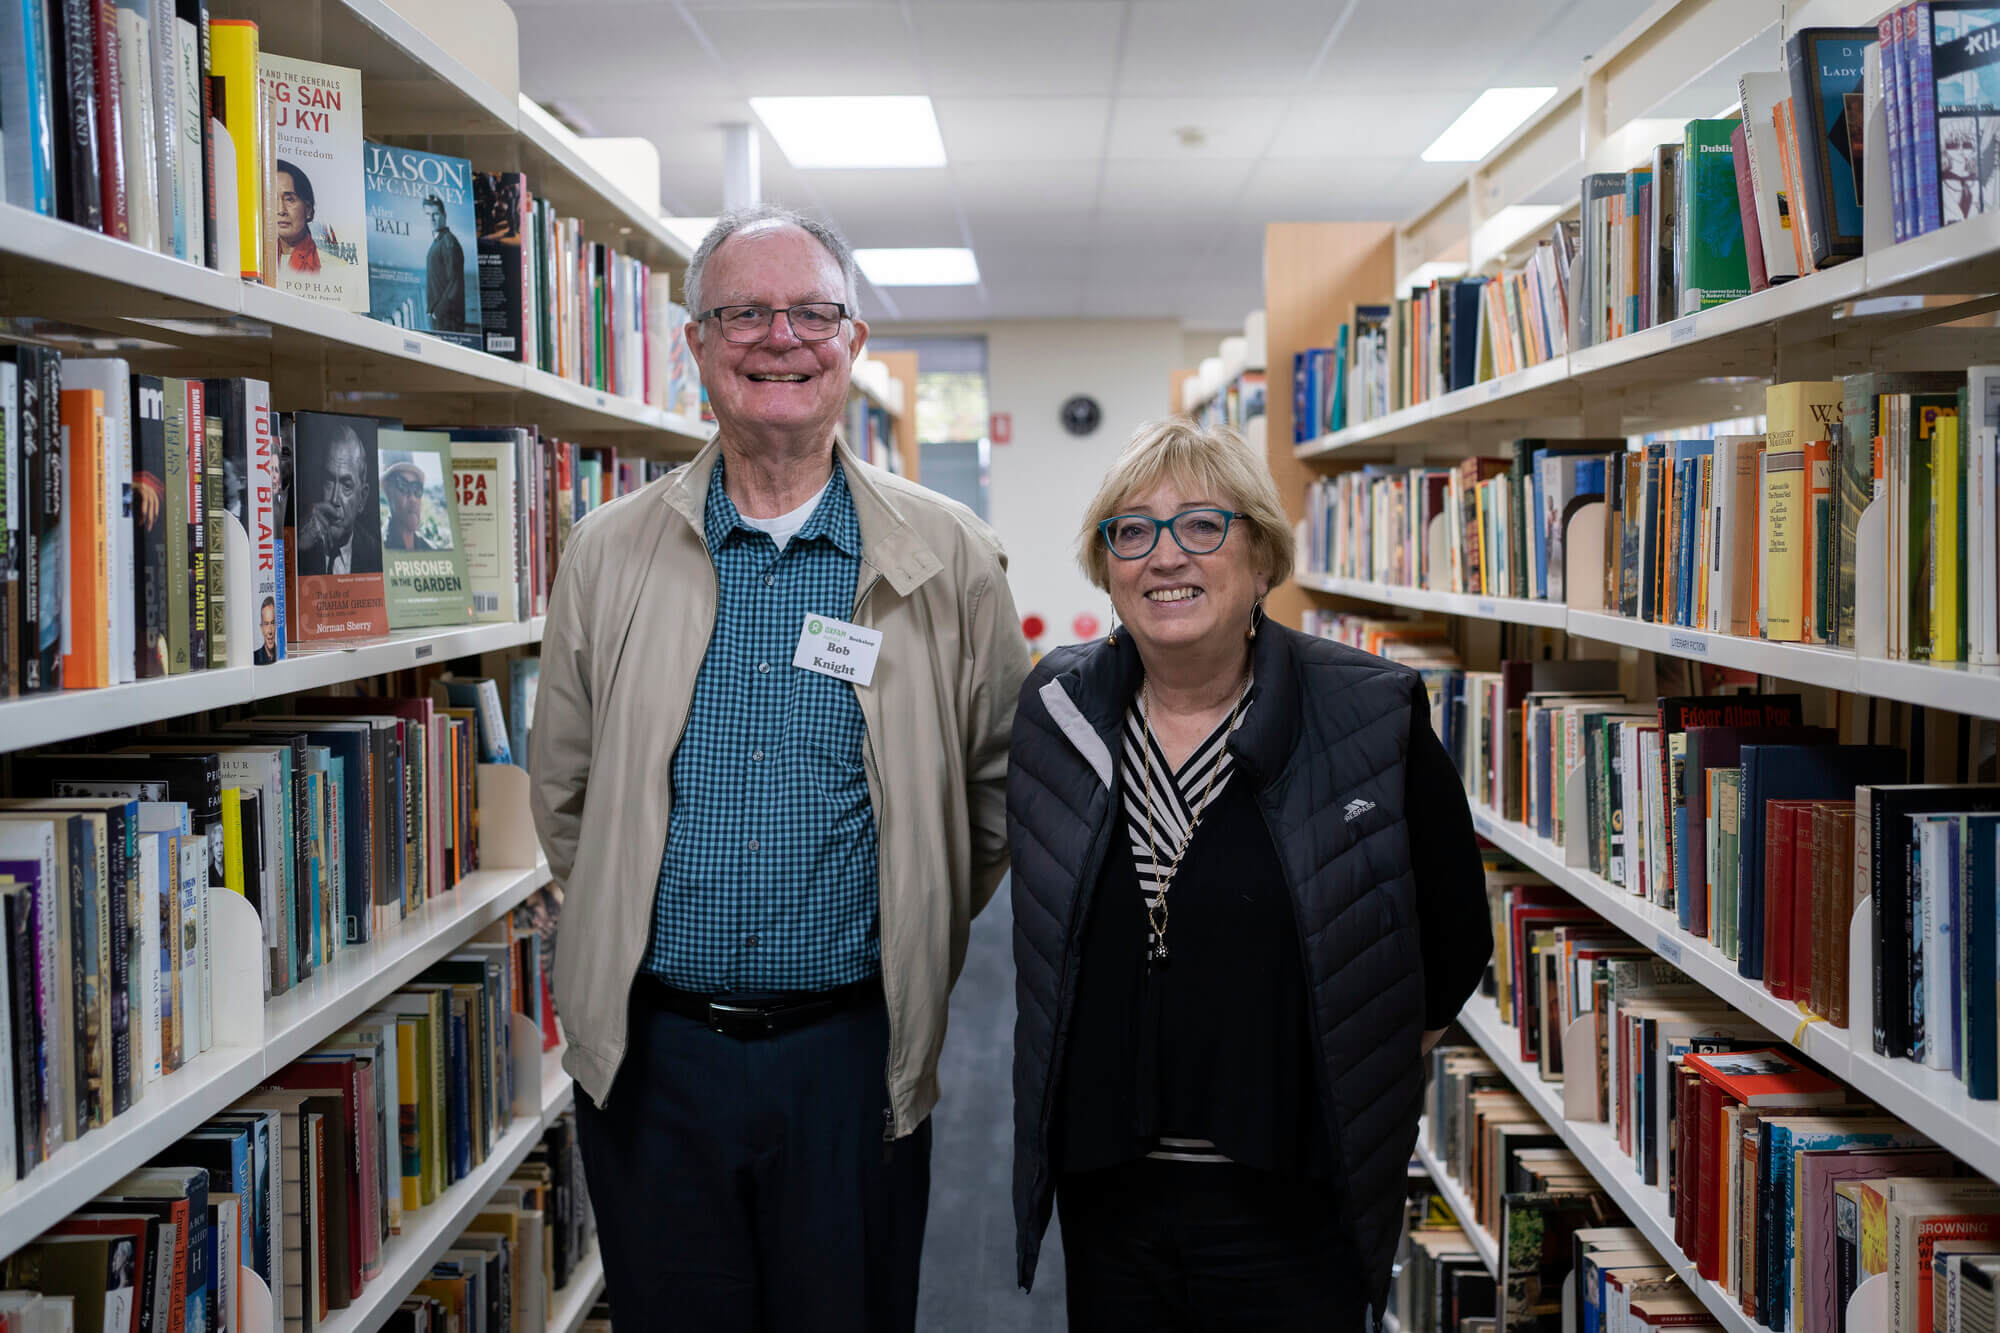 Two volunteers stand in the aisles of a bookshop.